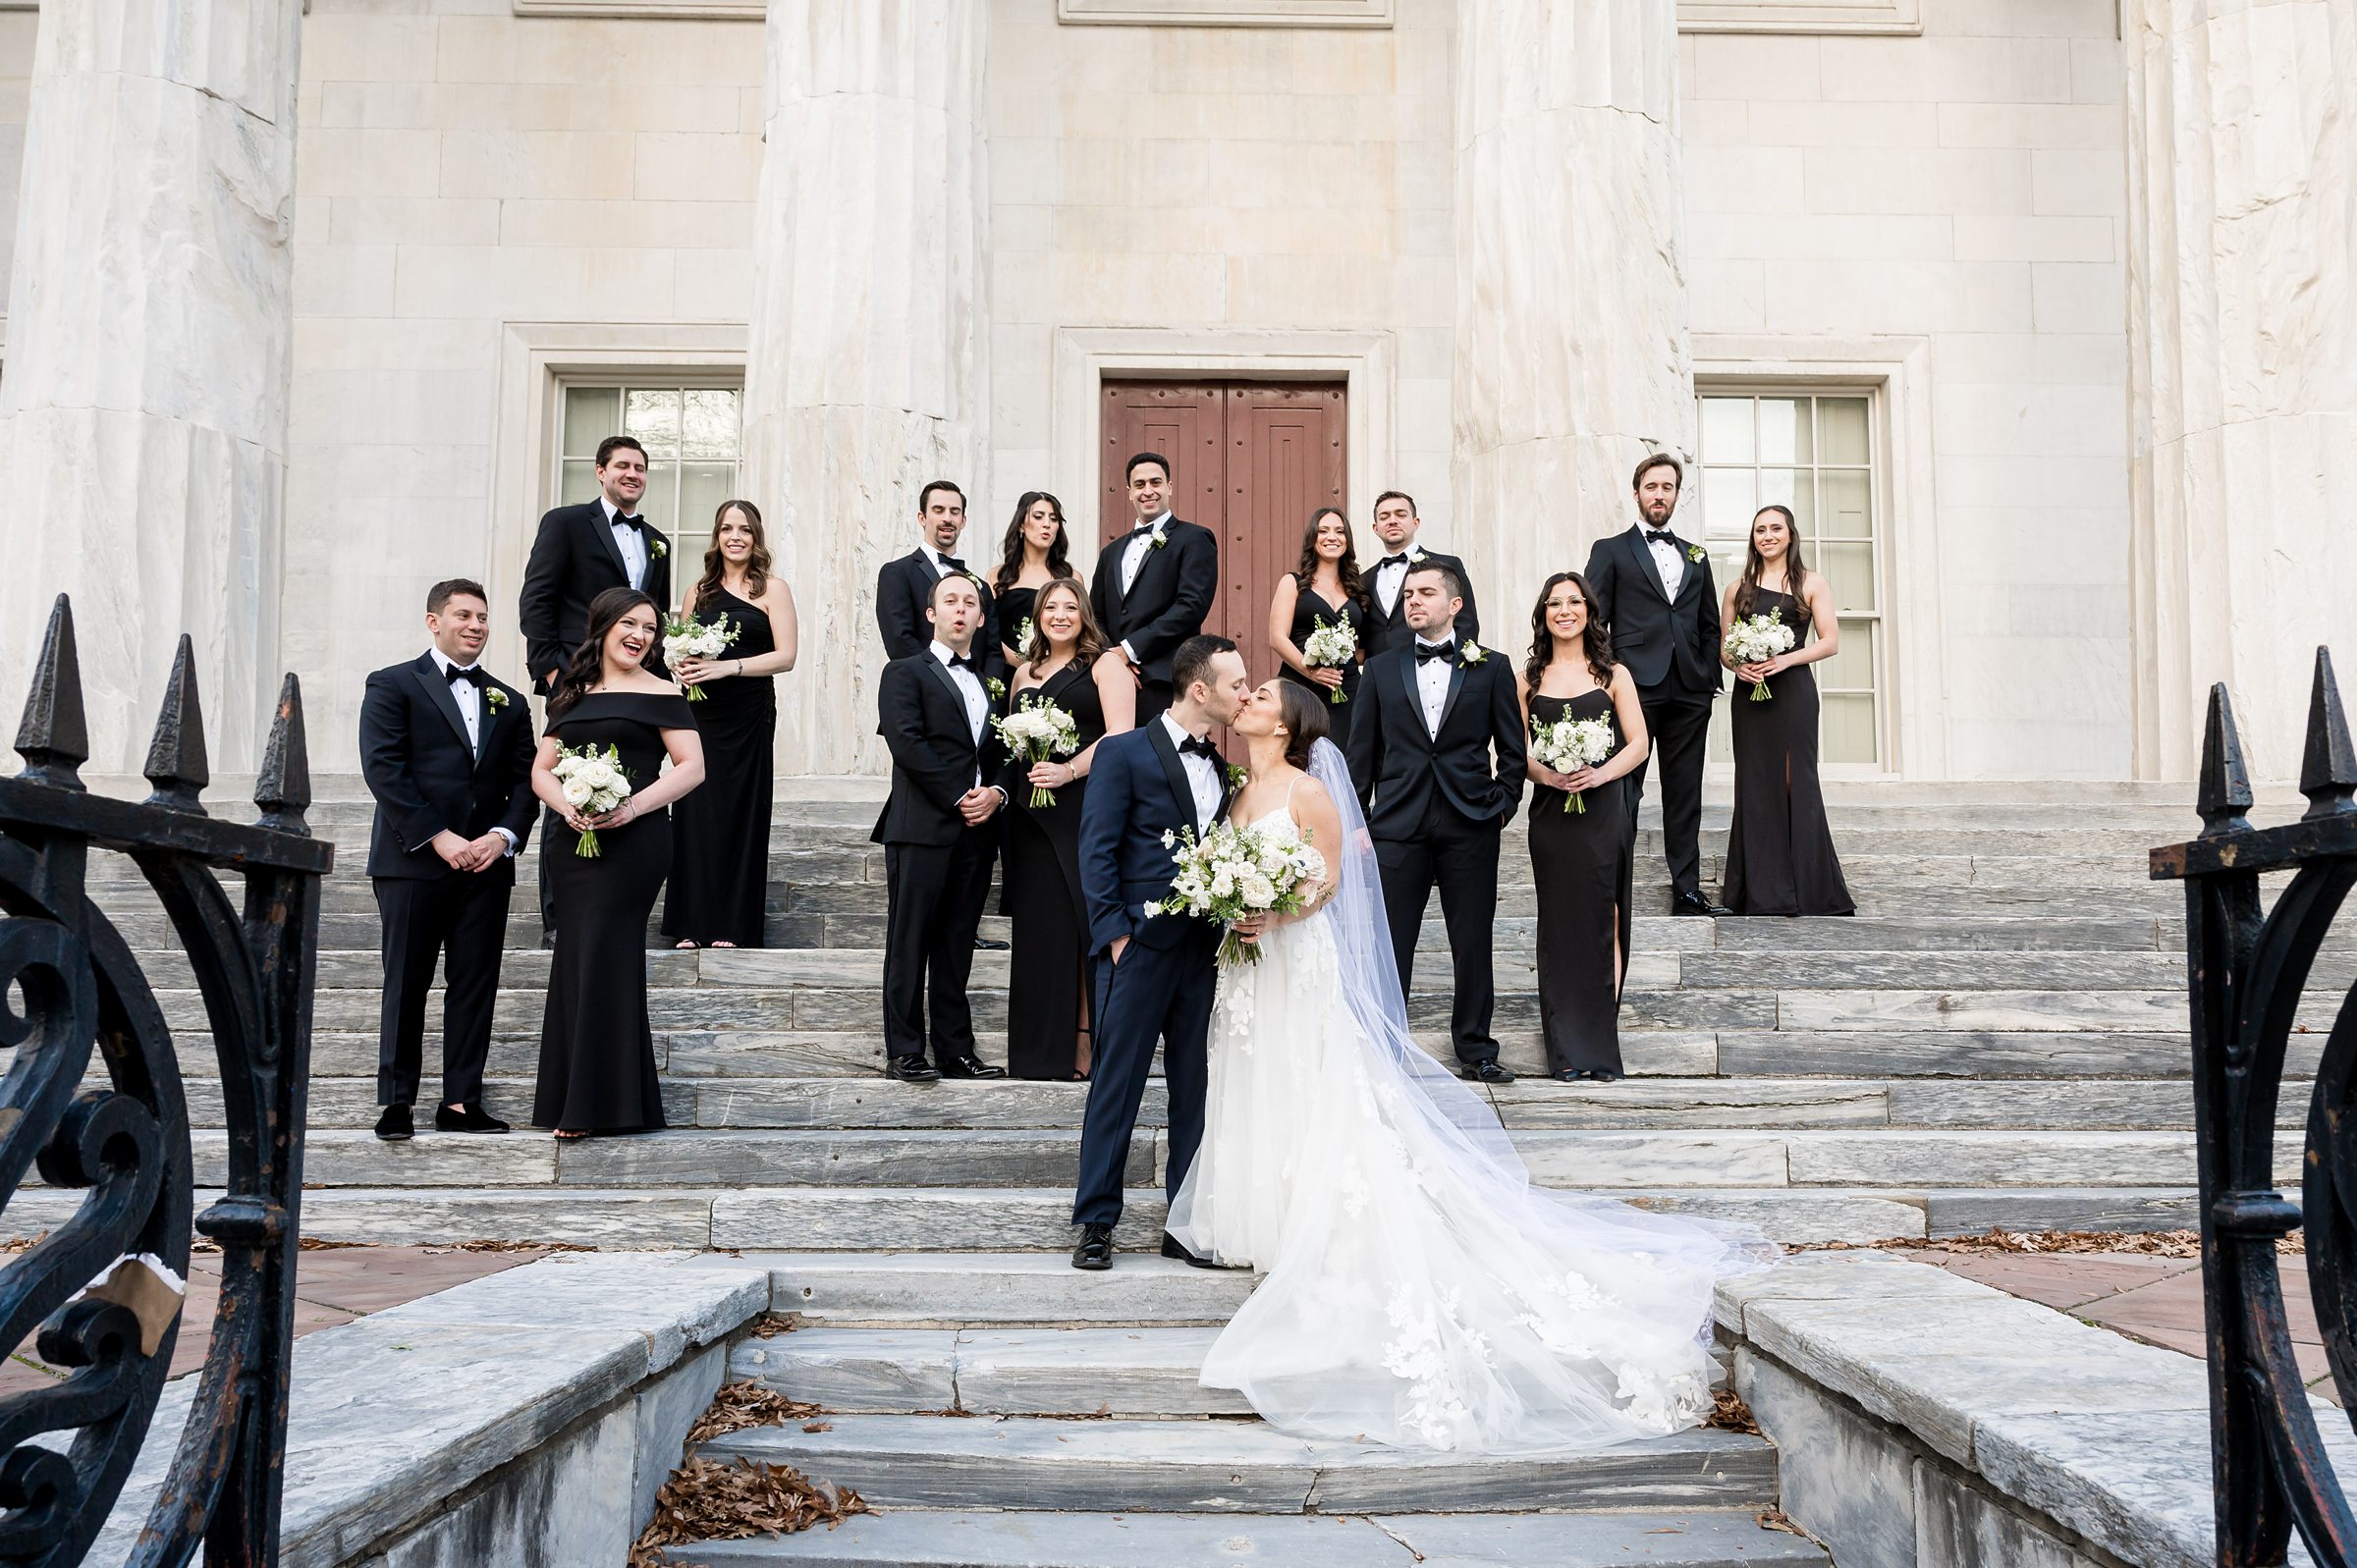 A Wedding party from Lilah Events posing on the steps of a building.